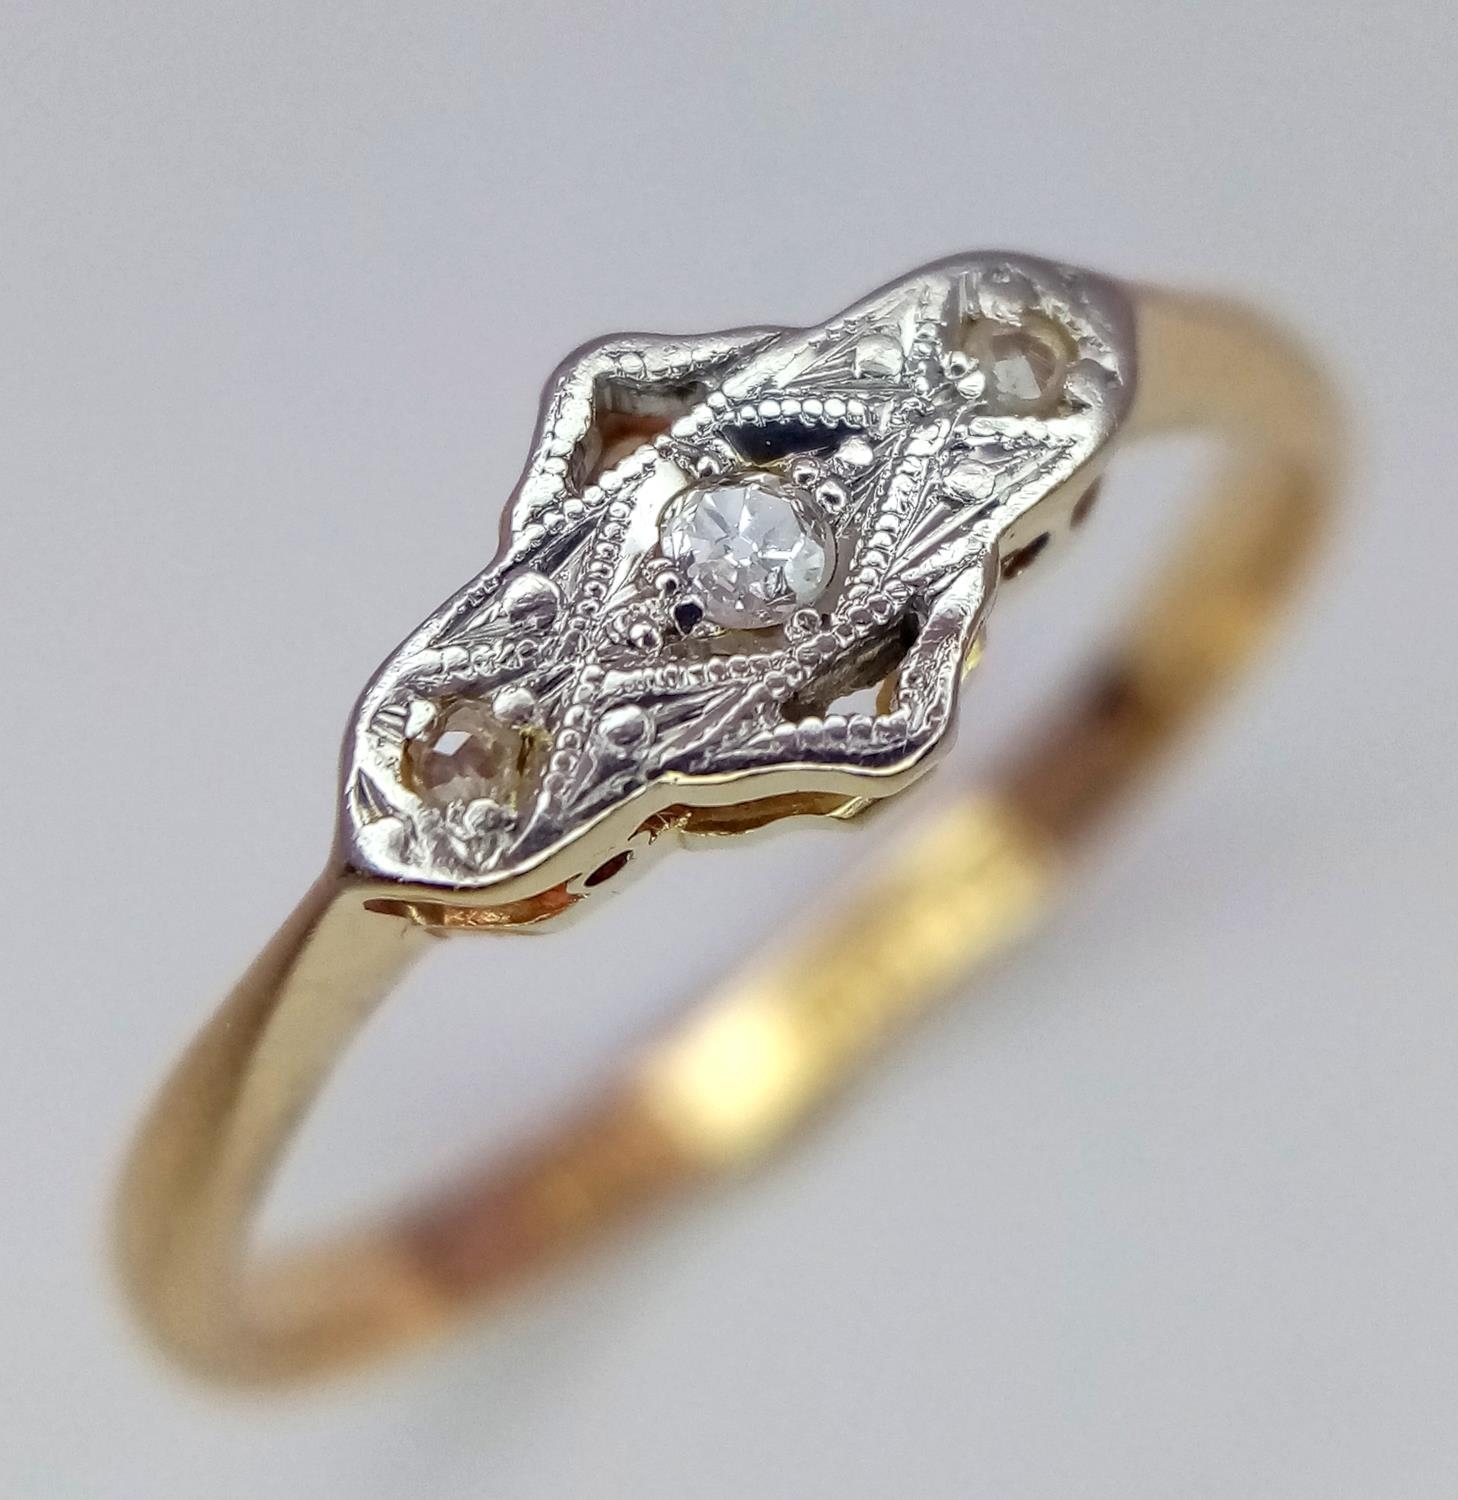 AN 18K YELLOW GOLD & PLATINUM VINTAGE DIAMOND RING. Size O, 2.2g total weight. Ref: SC 9042